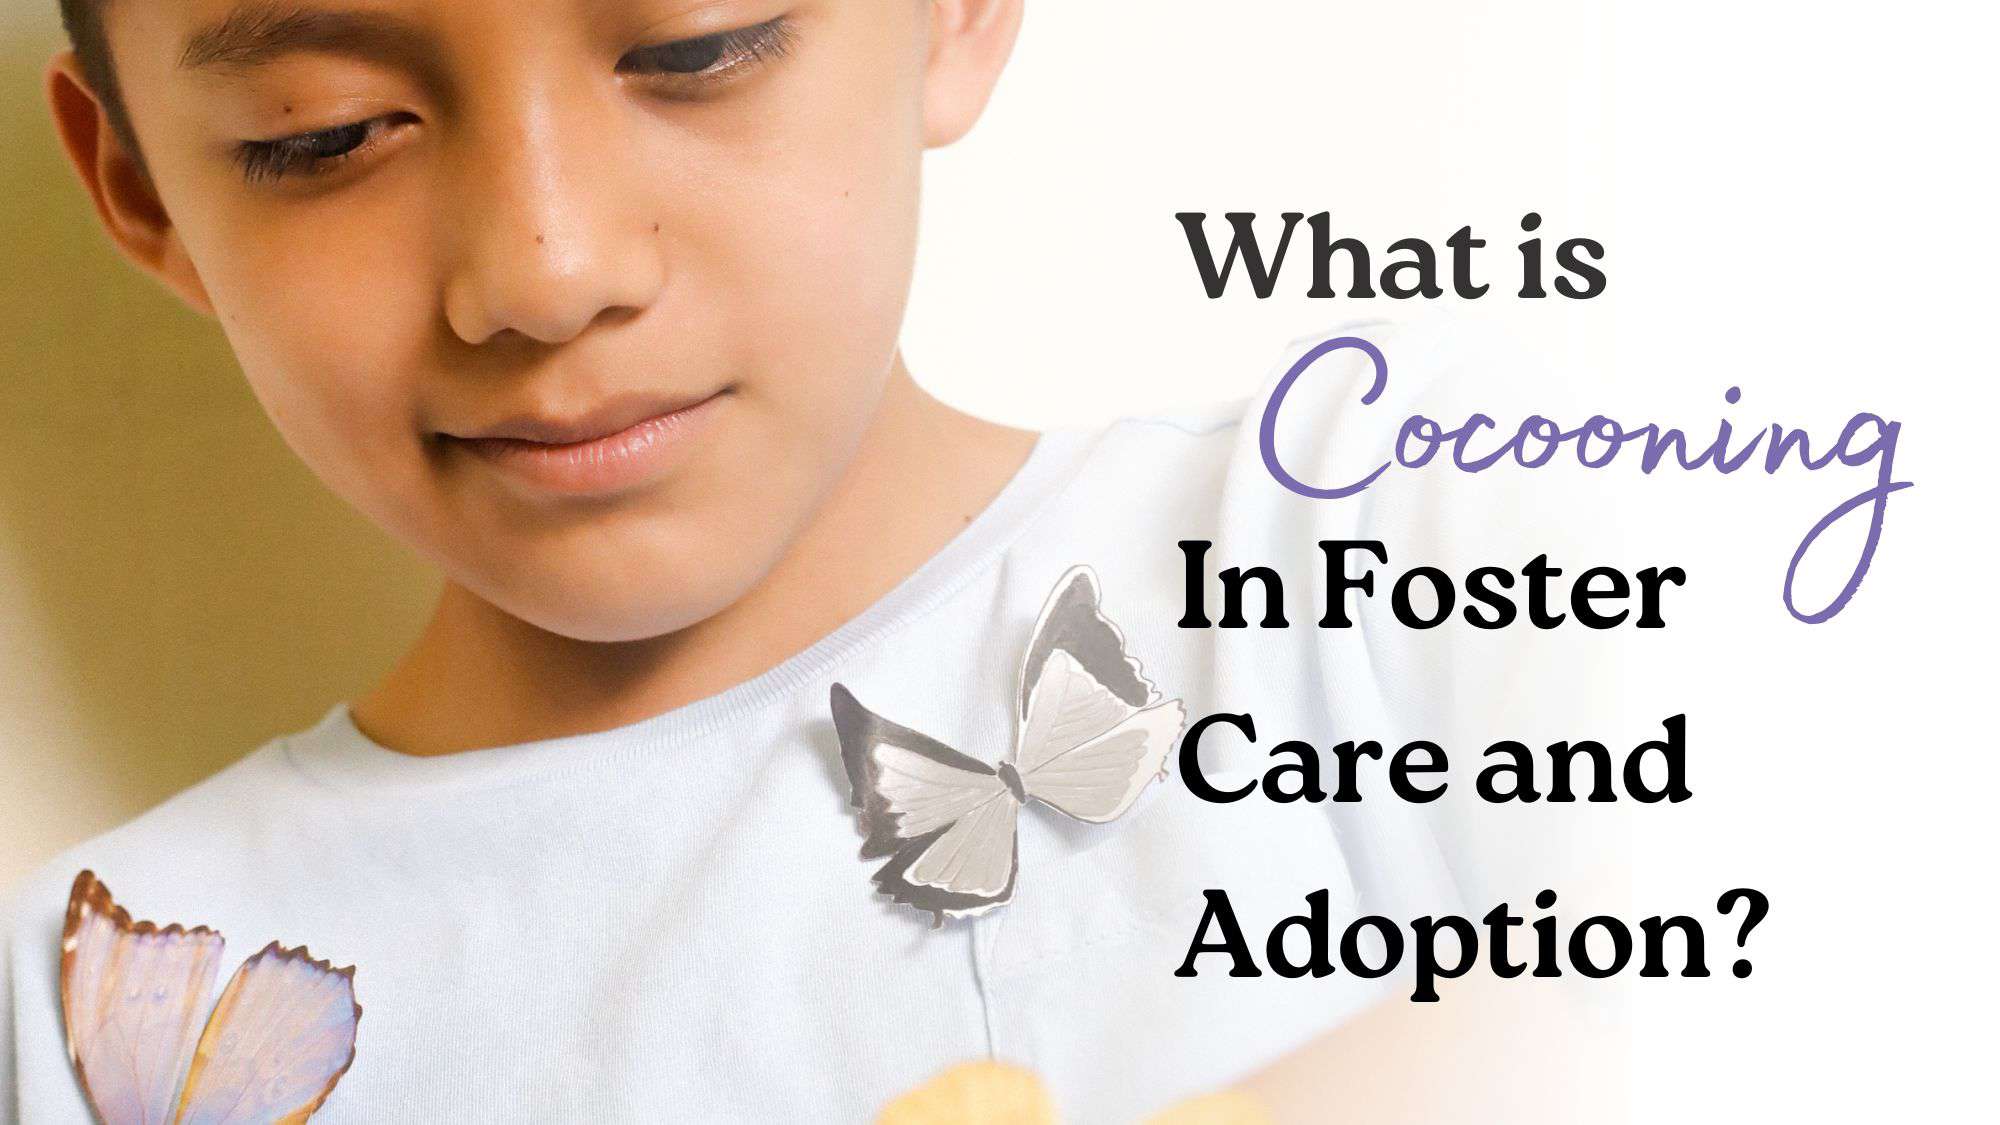 What is Cocooning in Foster Care and Adoption